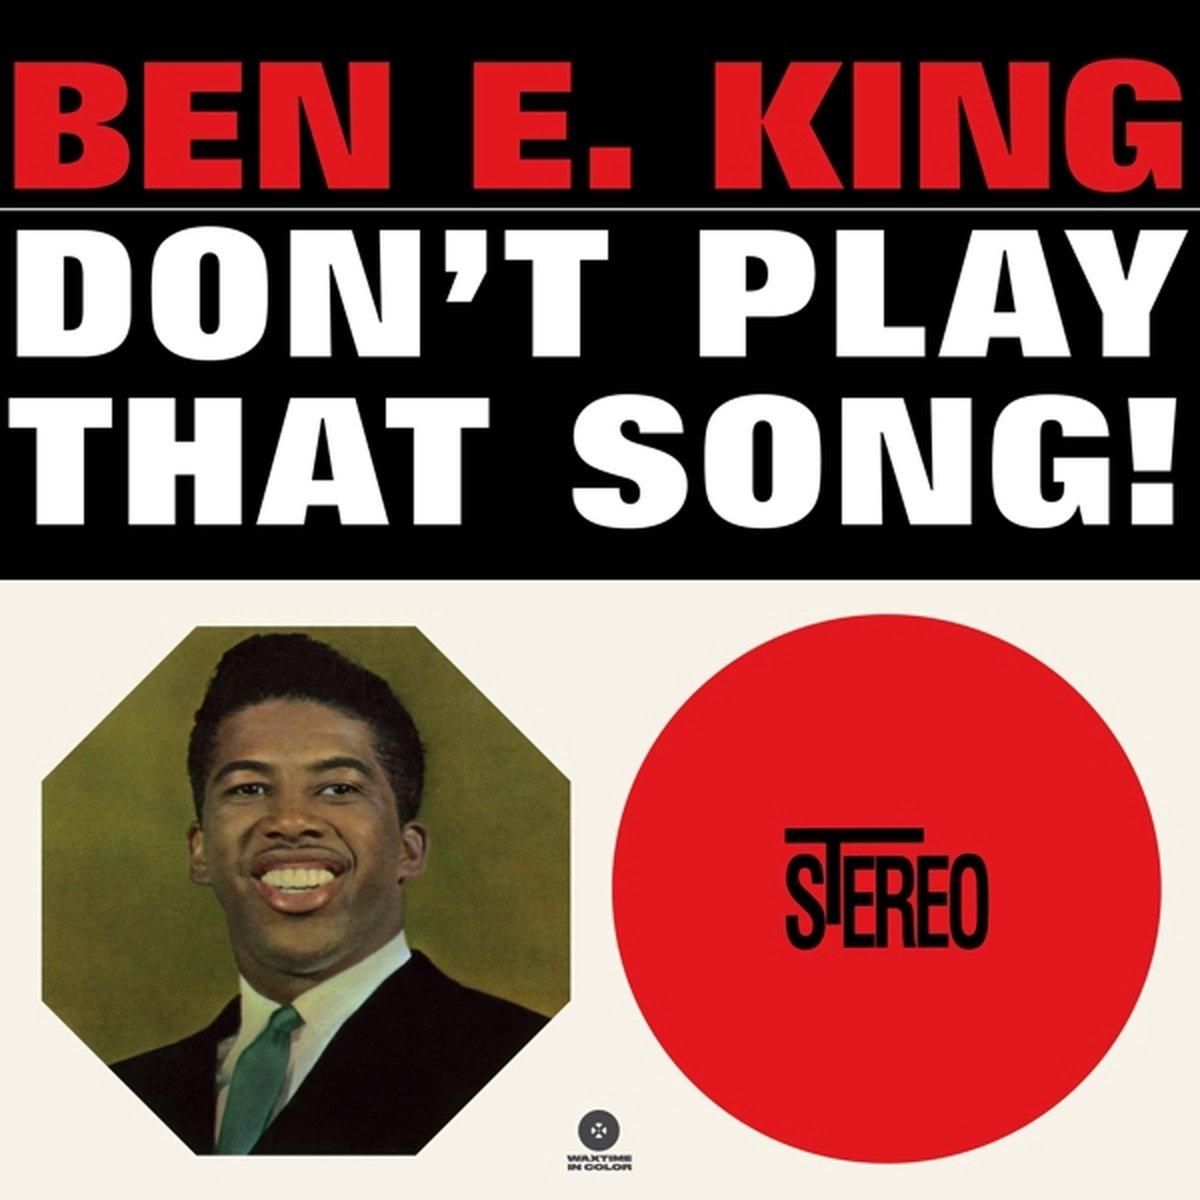 DON'T PLAY THAT SONG! [LTD.ED. RED VINYL]